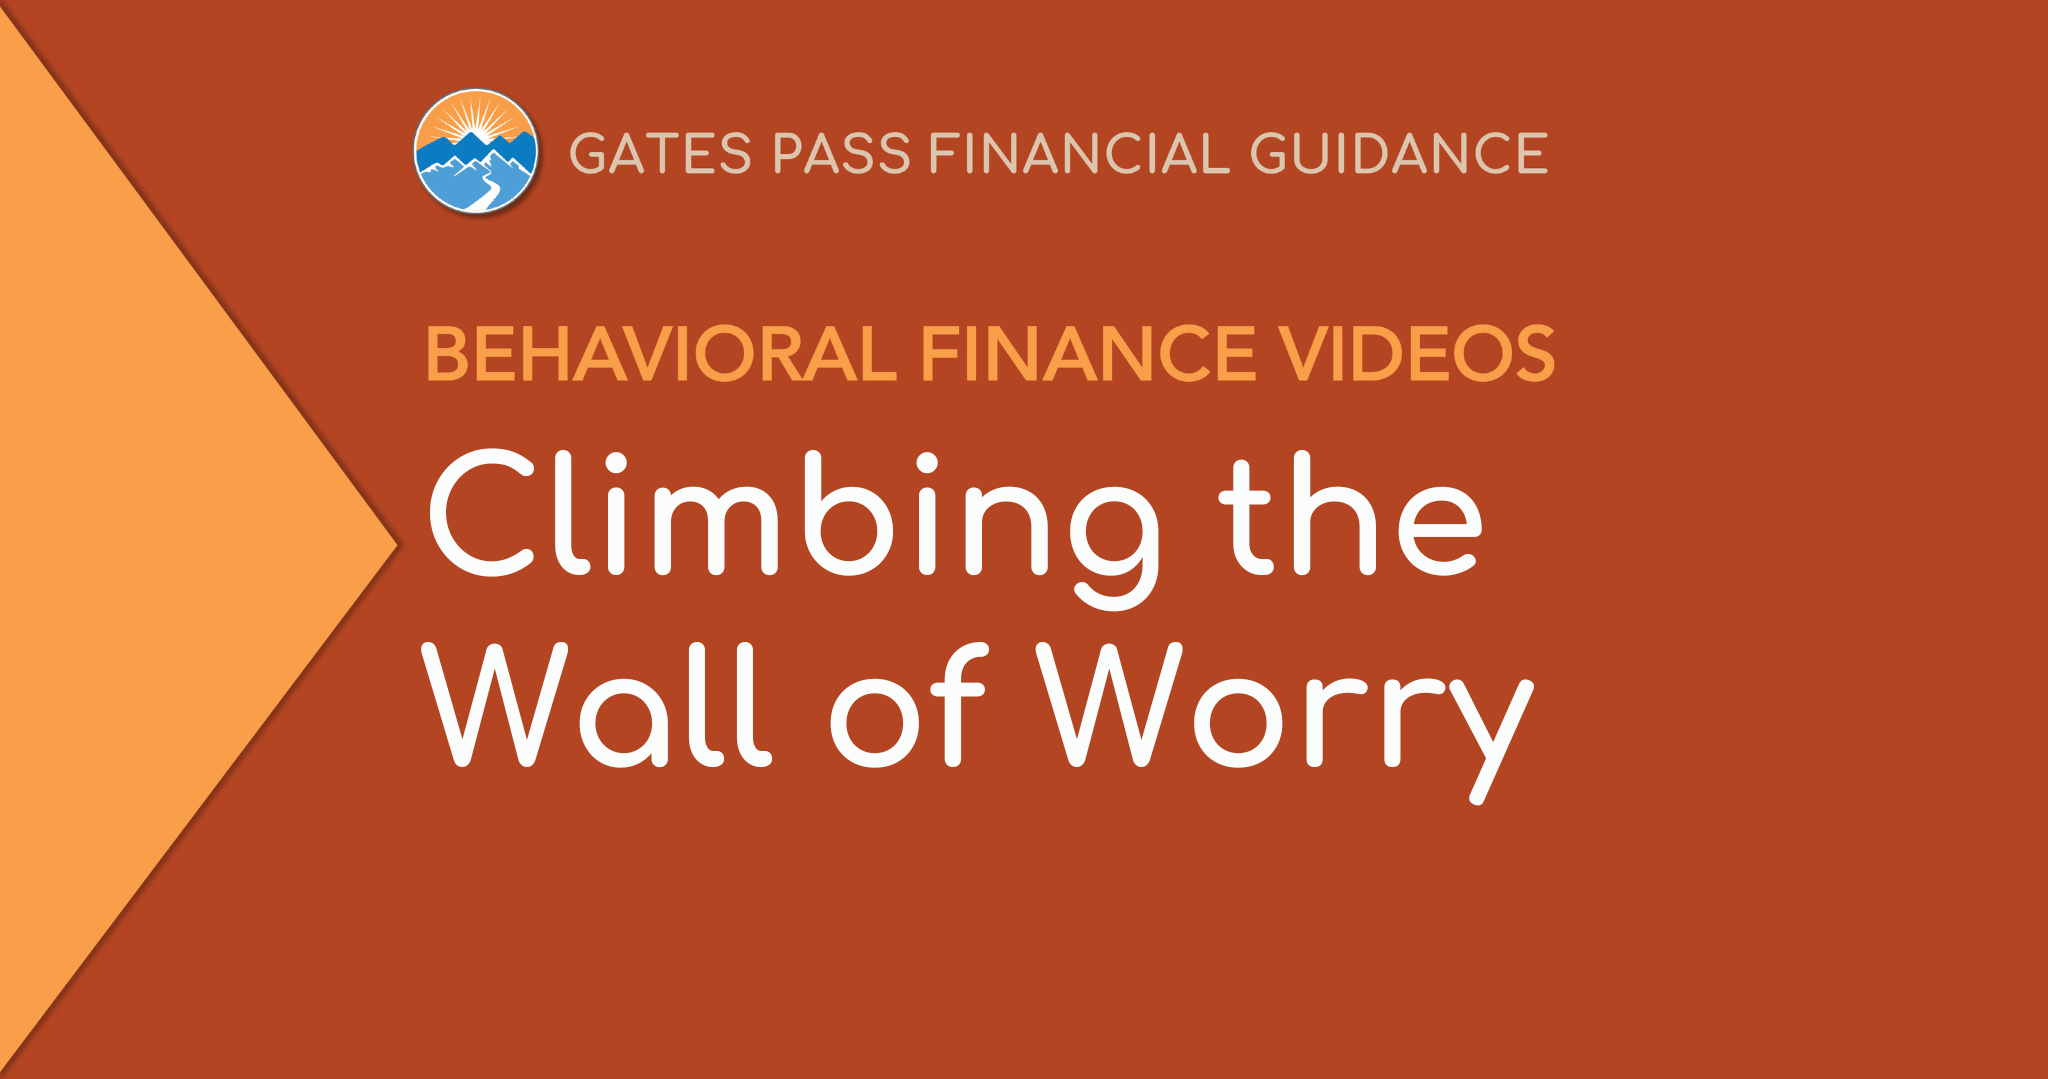 VIDEO-Climbing-the-Wall-of-Worry-1